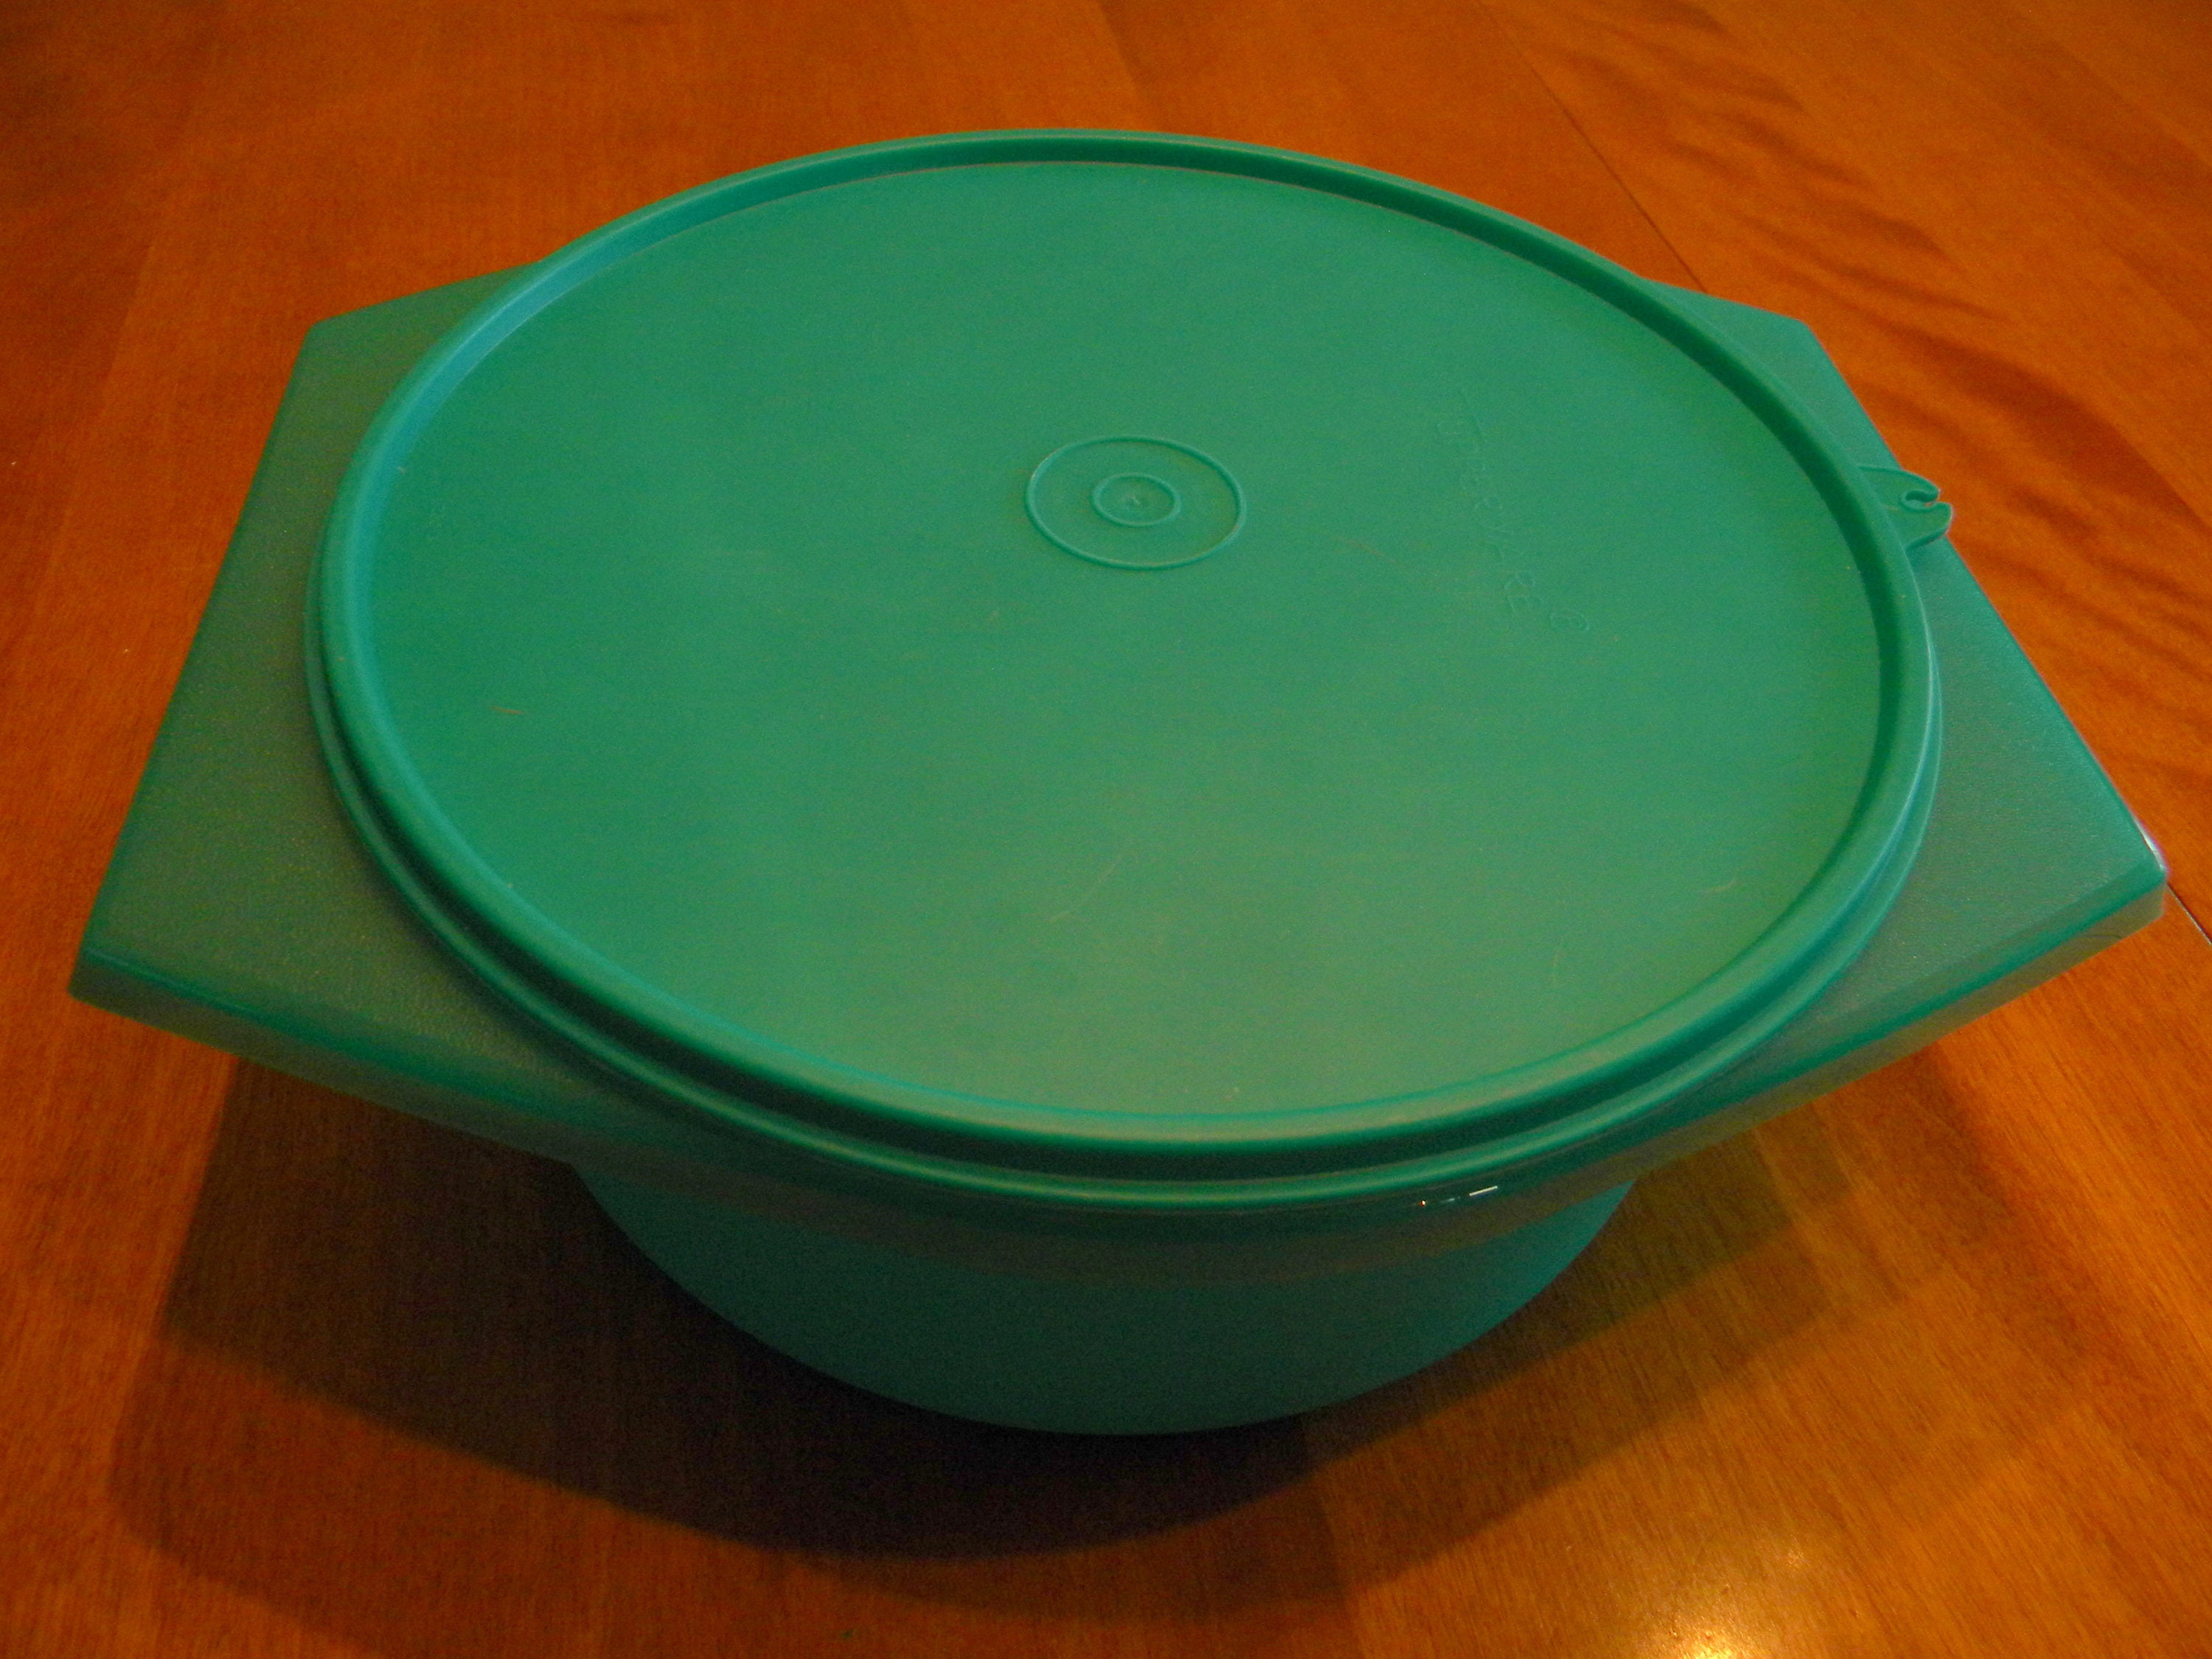 NEW Tupperware Large Tortilla Keeper Green 12 cup storage container FrEeSh